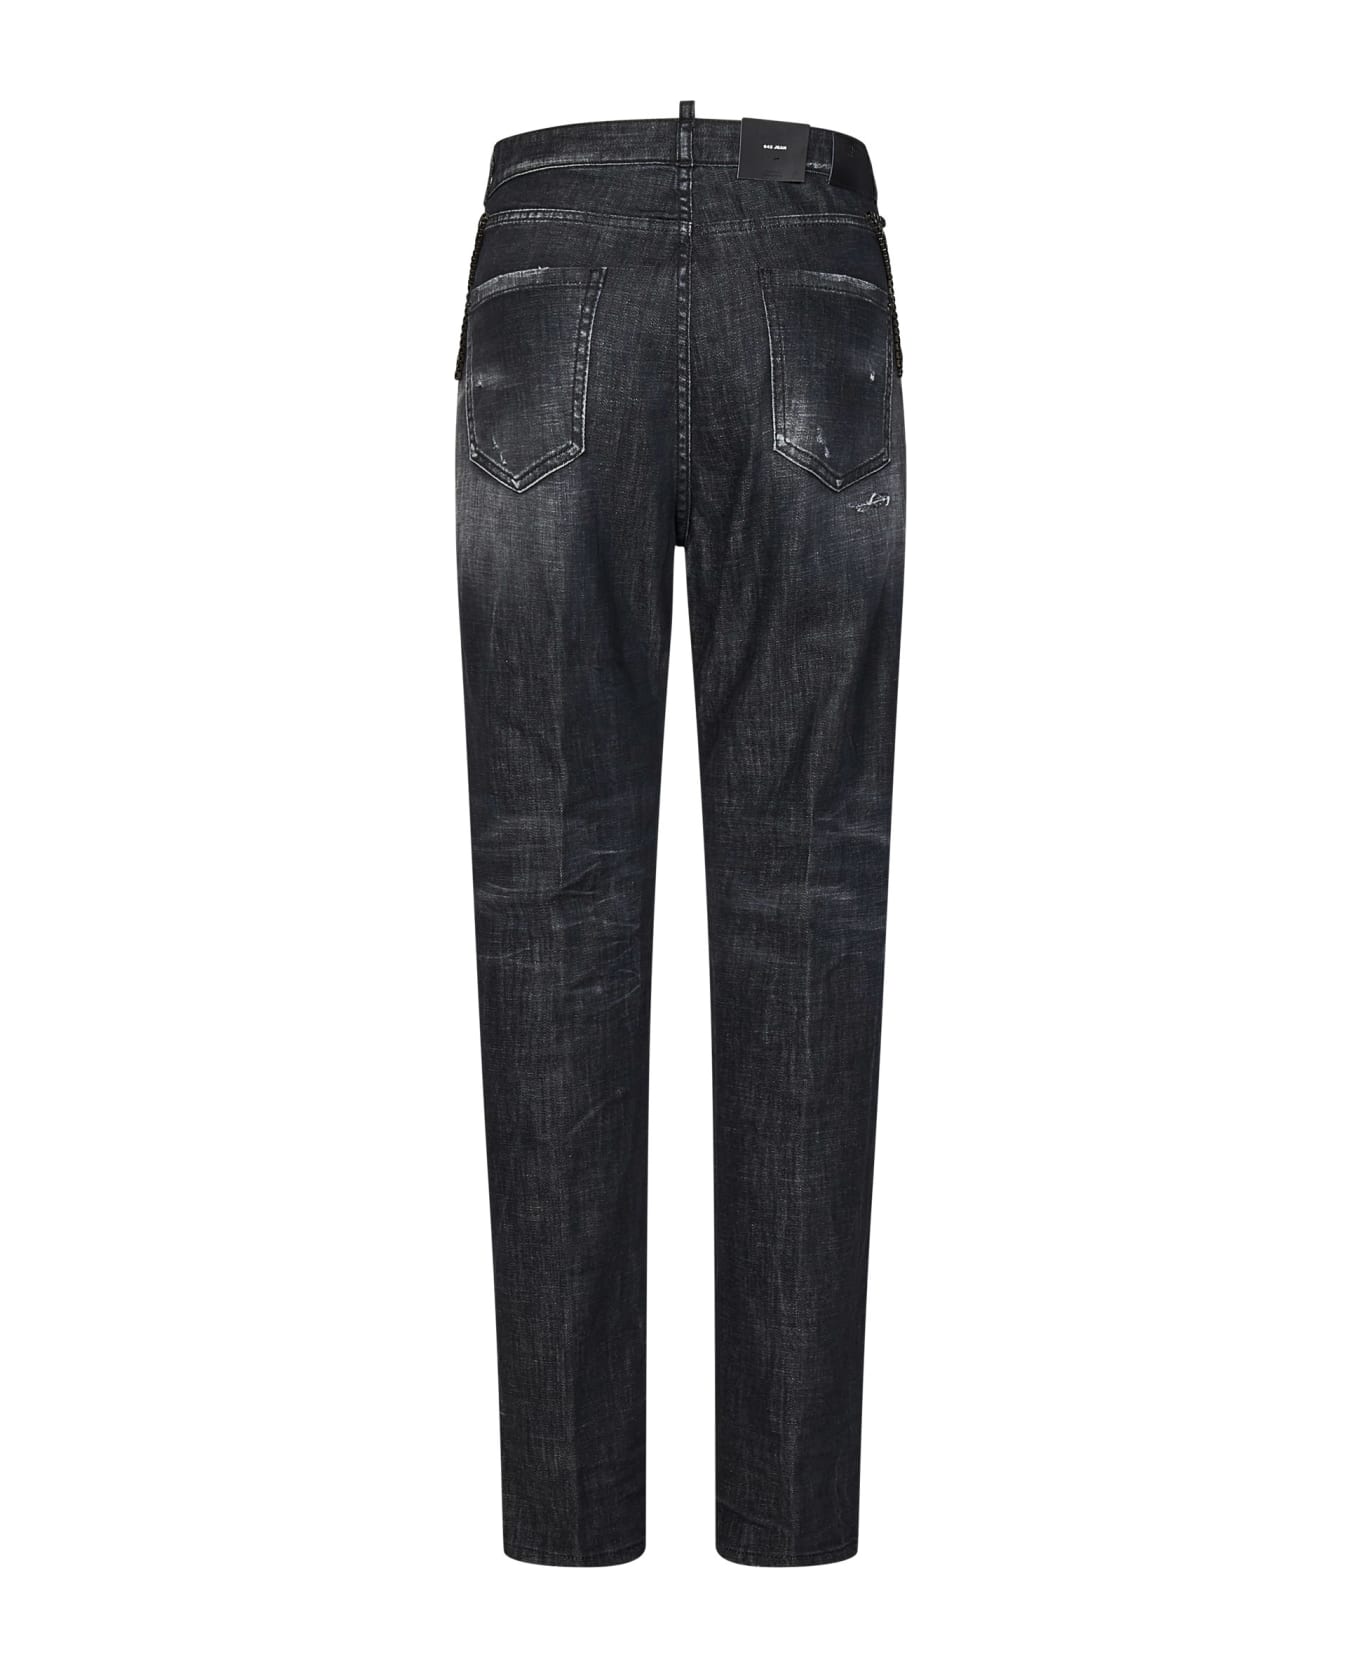 Dsquared2 Jeans - Col. 900 [090]